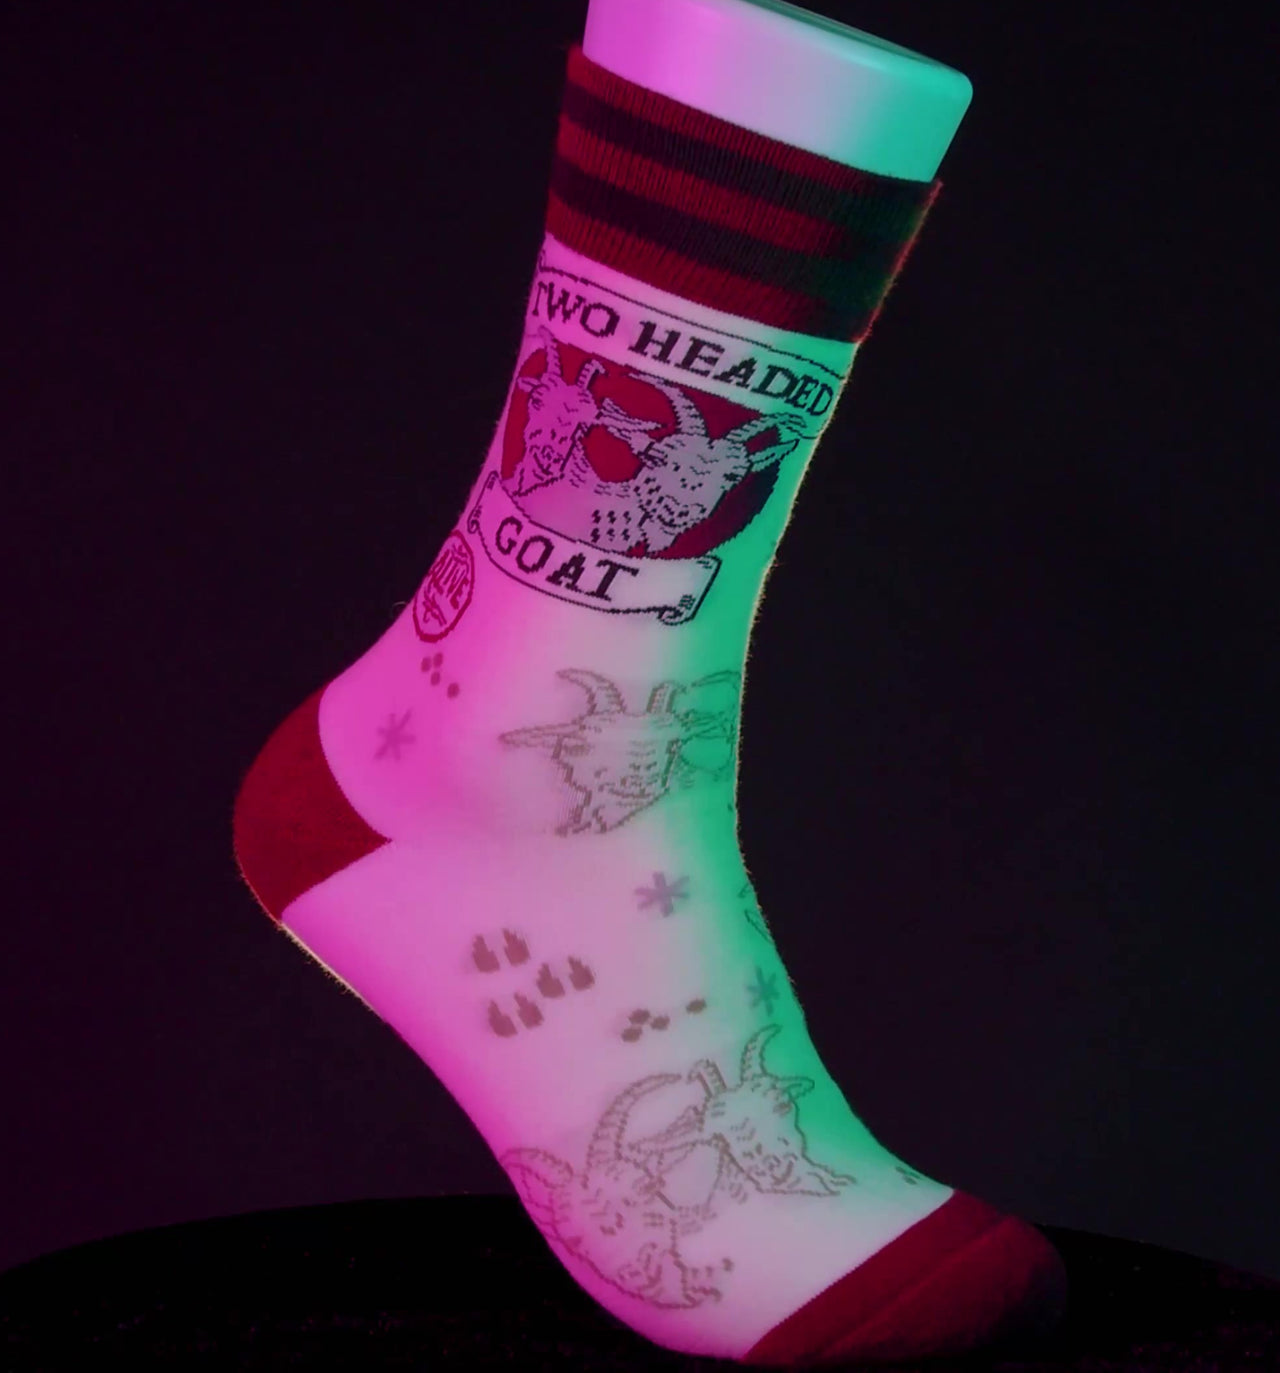 FOOTCLOTHES TWO HEADED GOAT CREW SOCKS